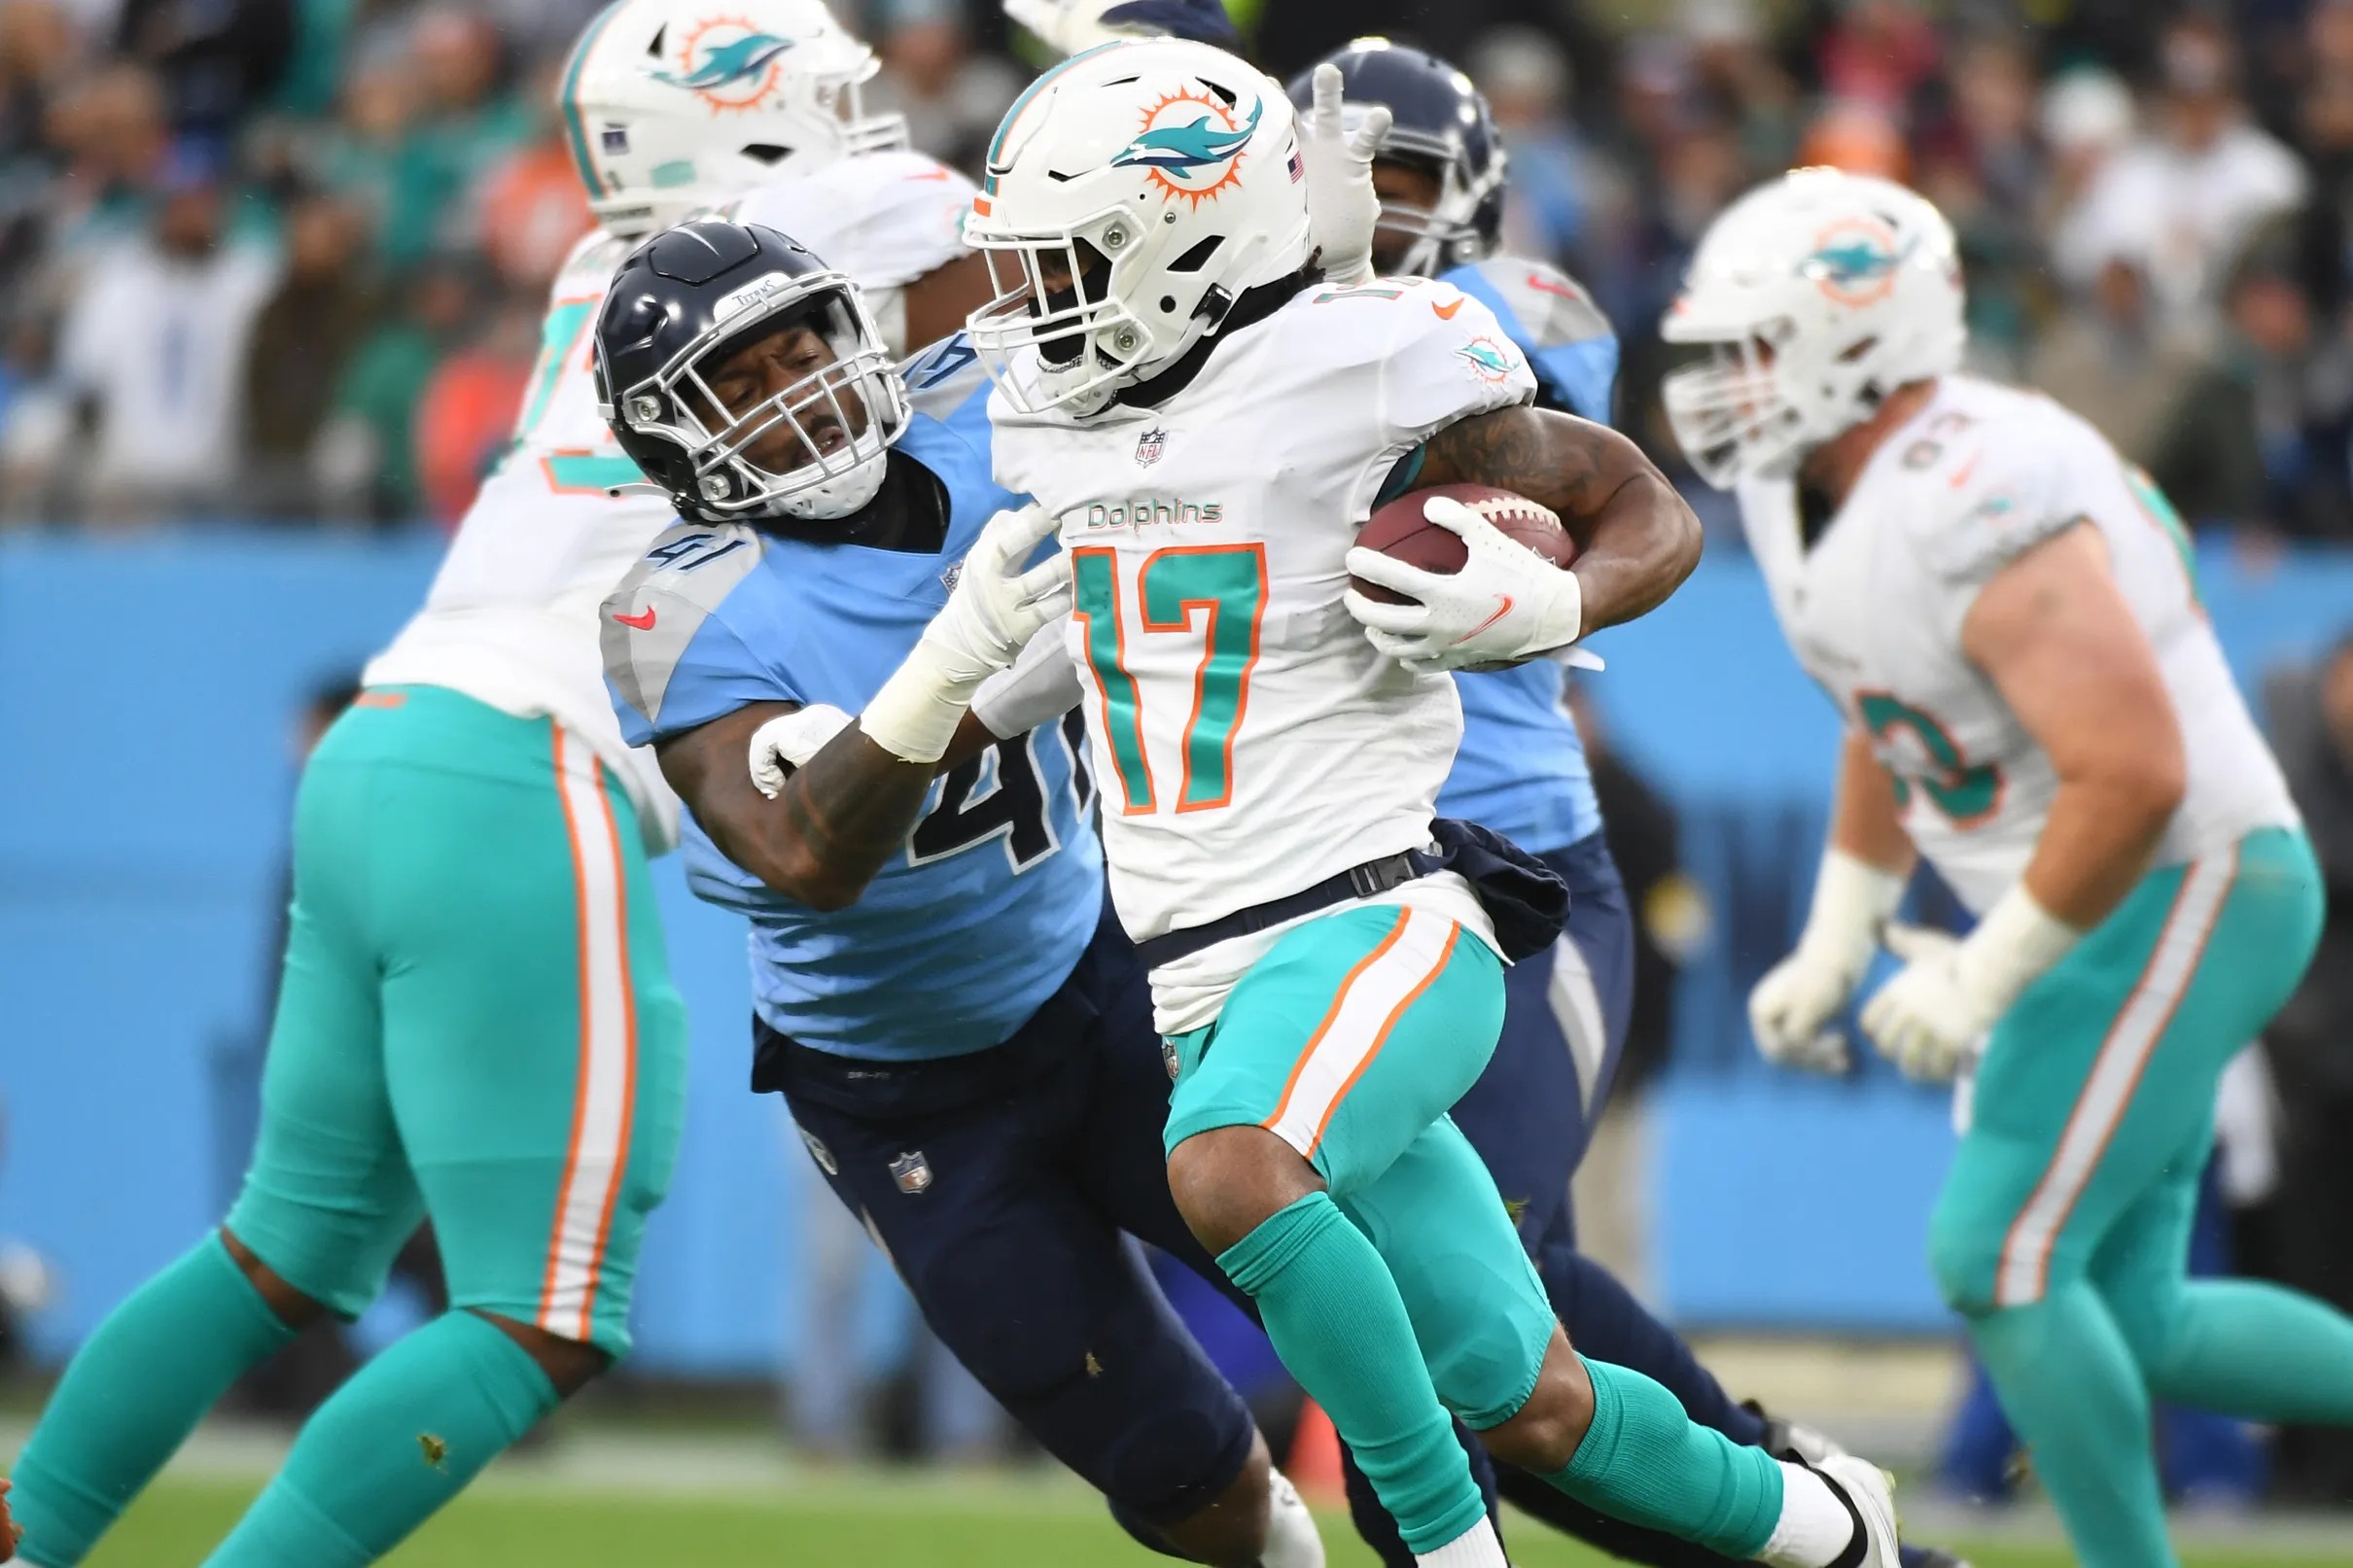 Dolphins Week 17 Rookie Report Card: Few bright spots in crushing loss